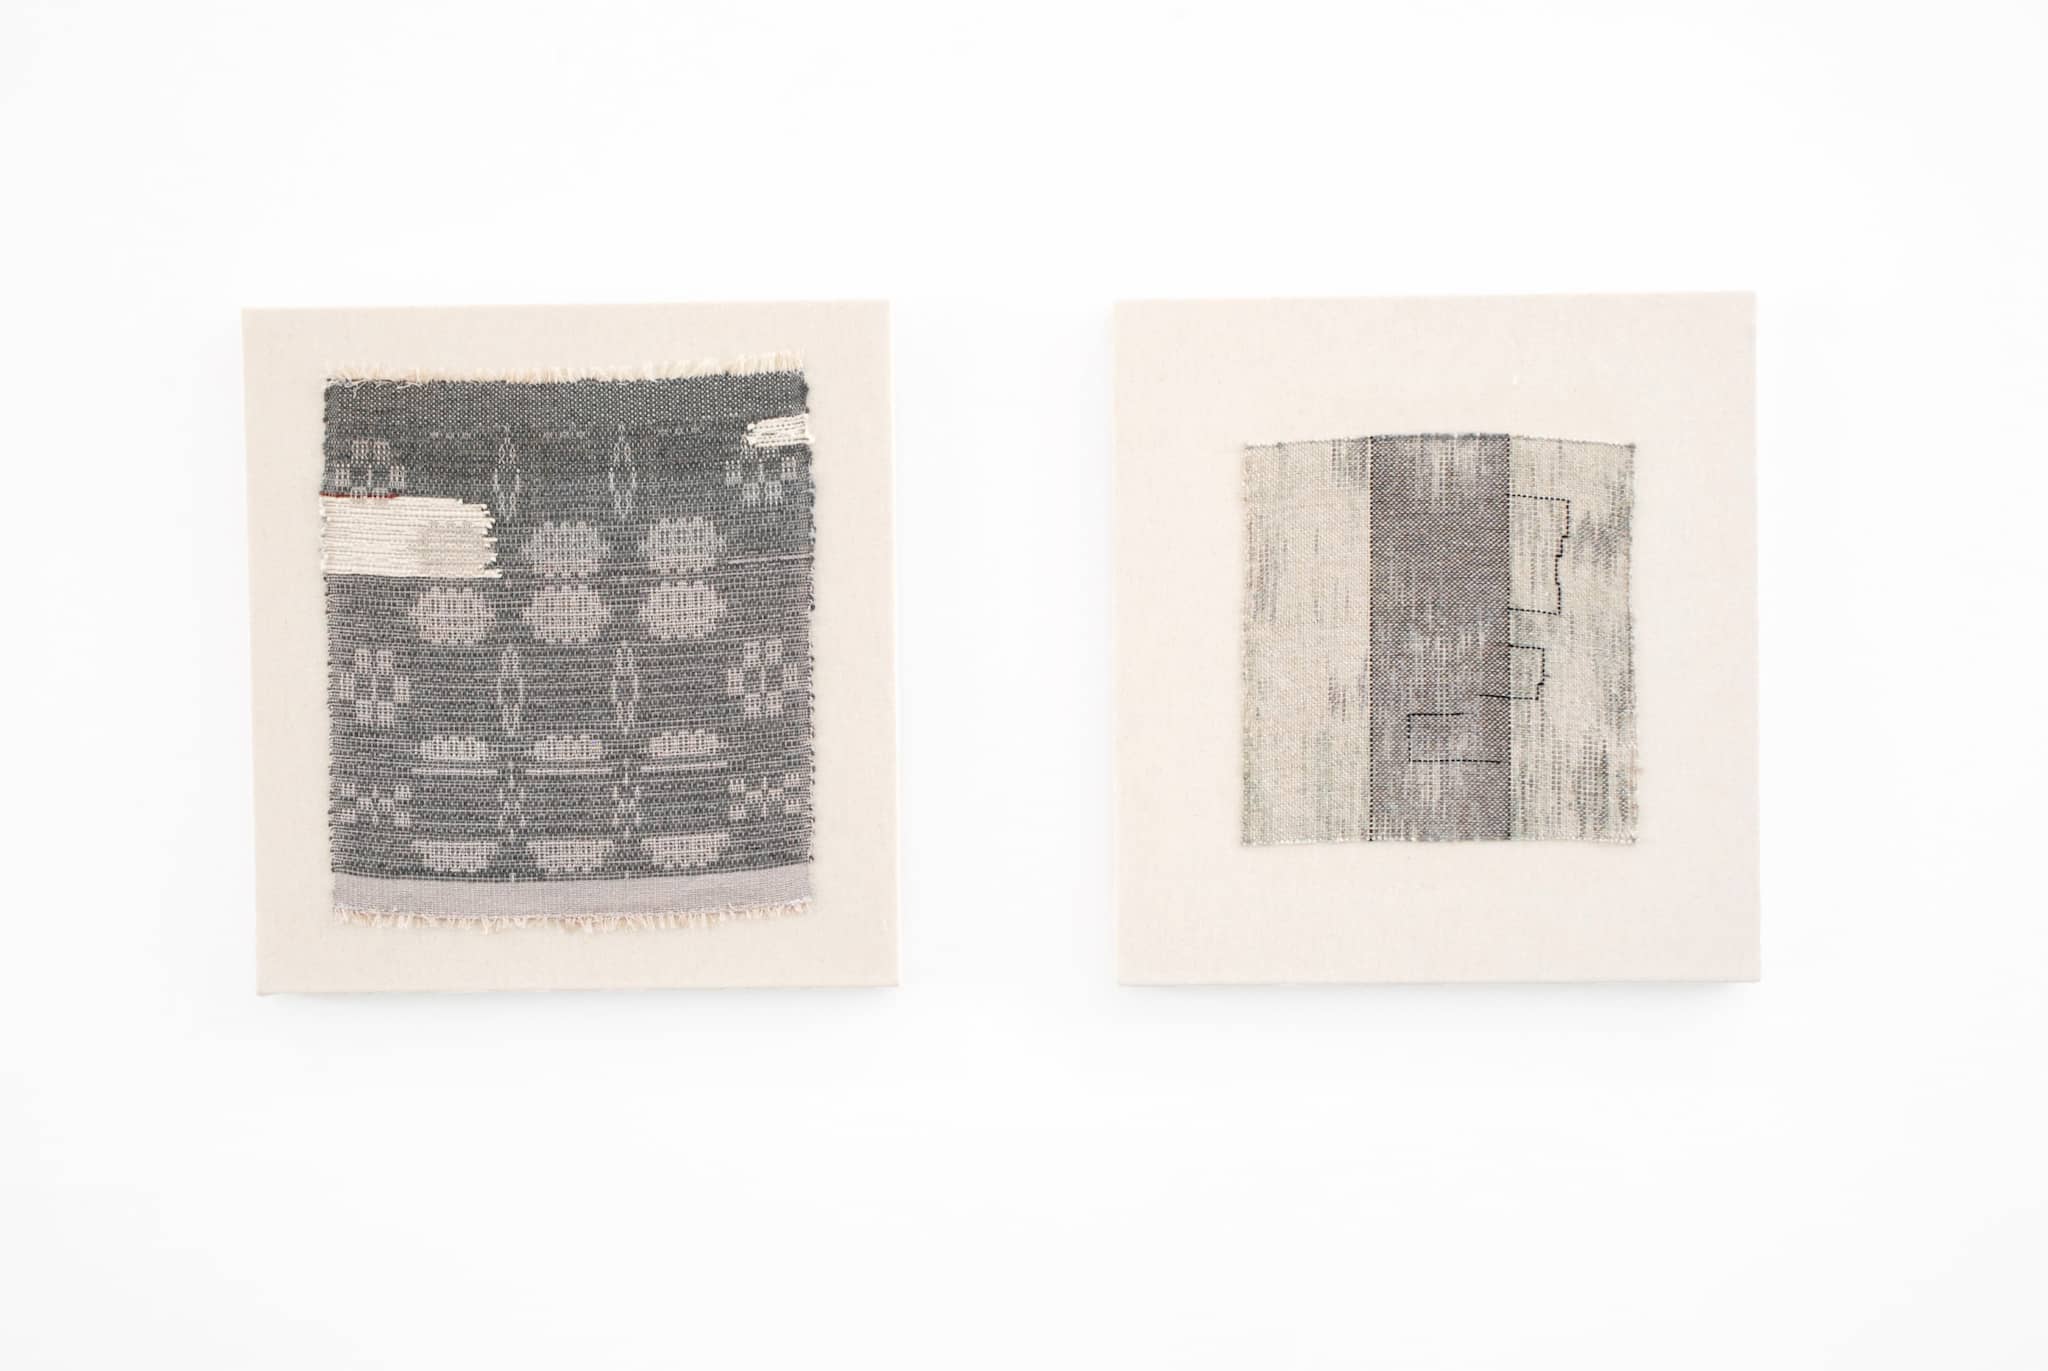 Rachel Snack, Material Meaning: A Living Legacy of Anni Albers, Craft in America